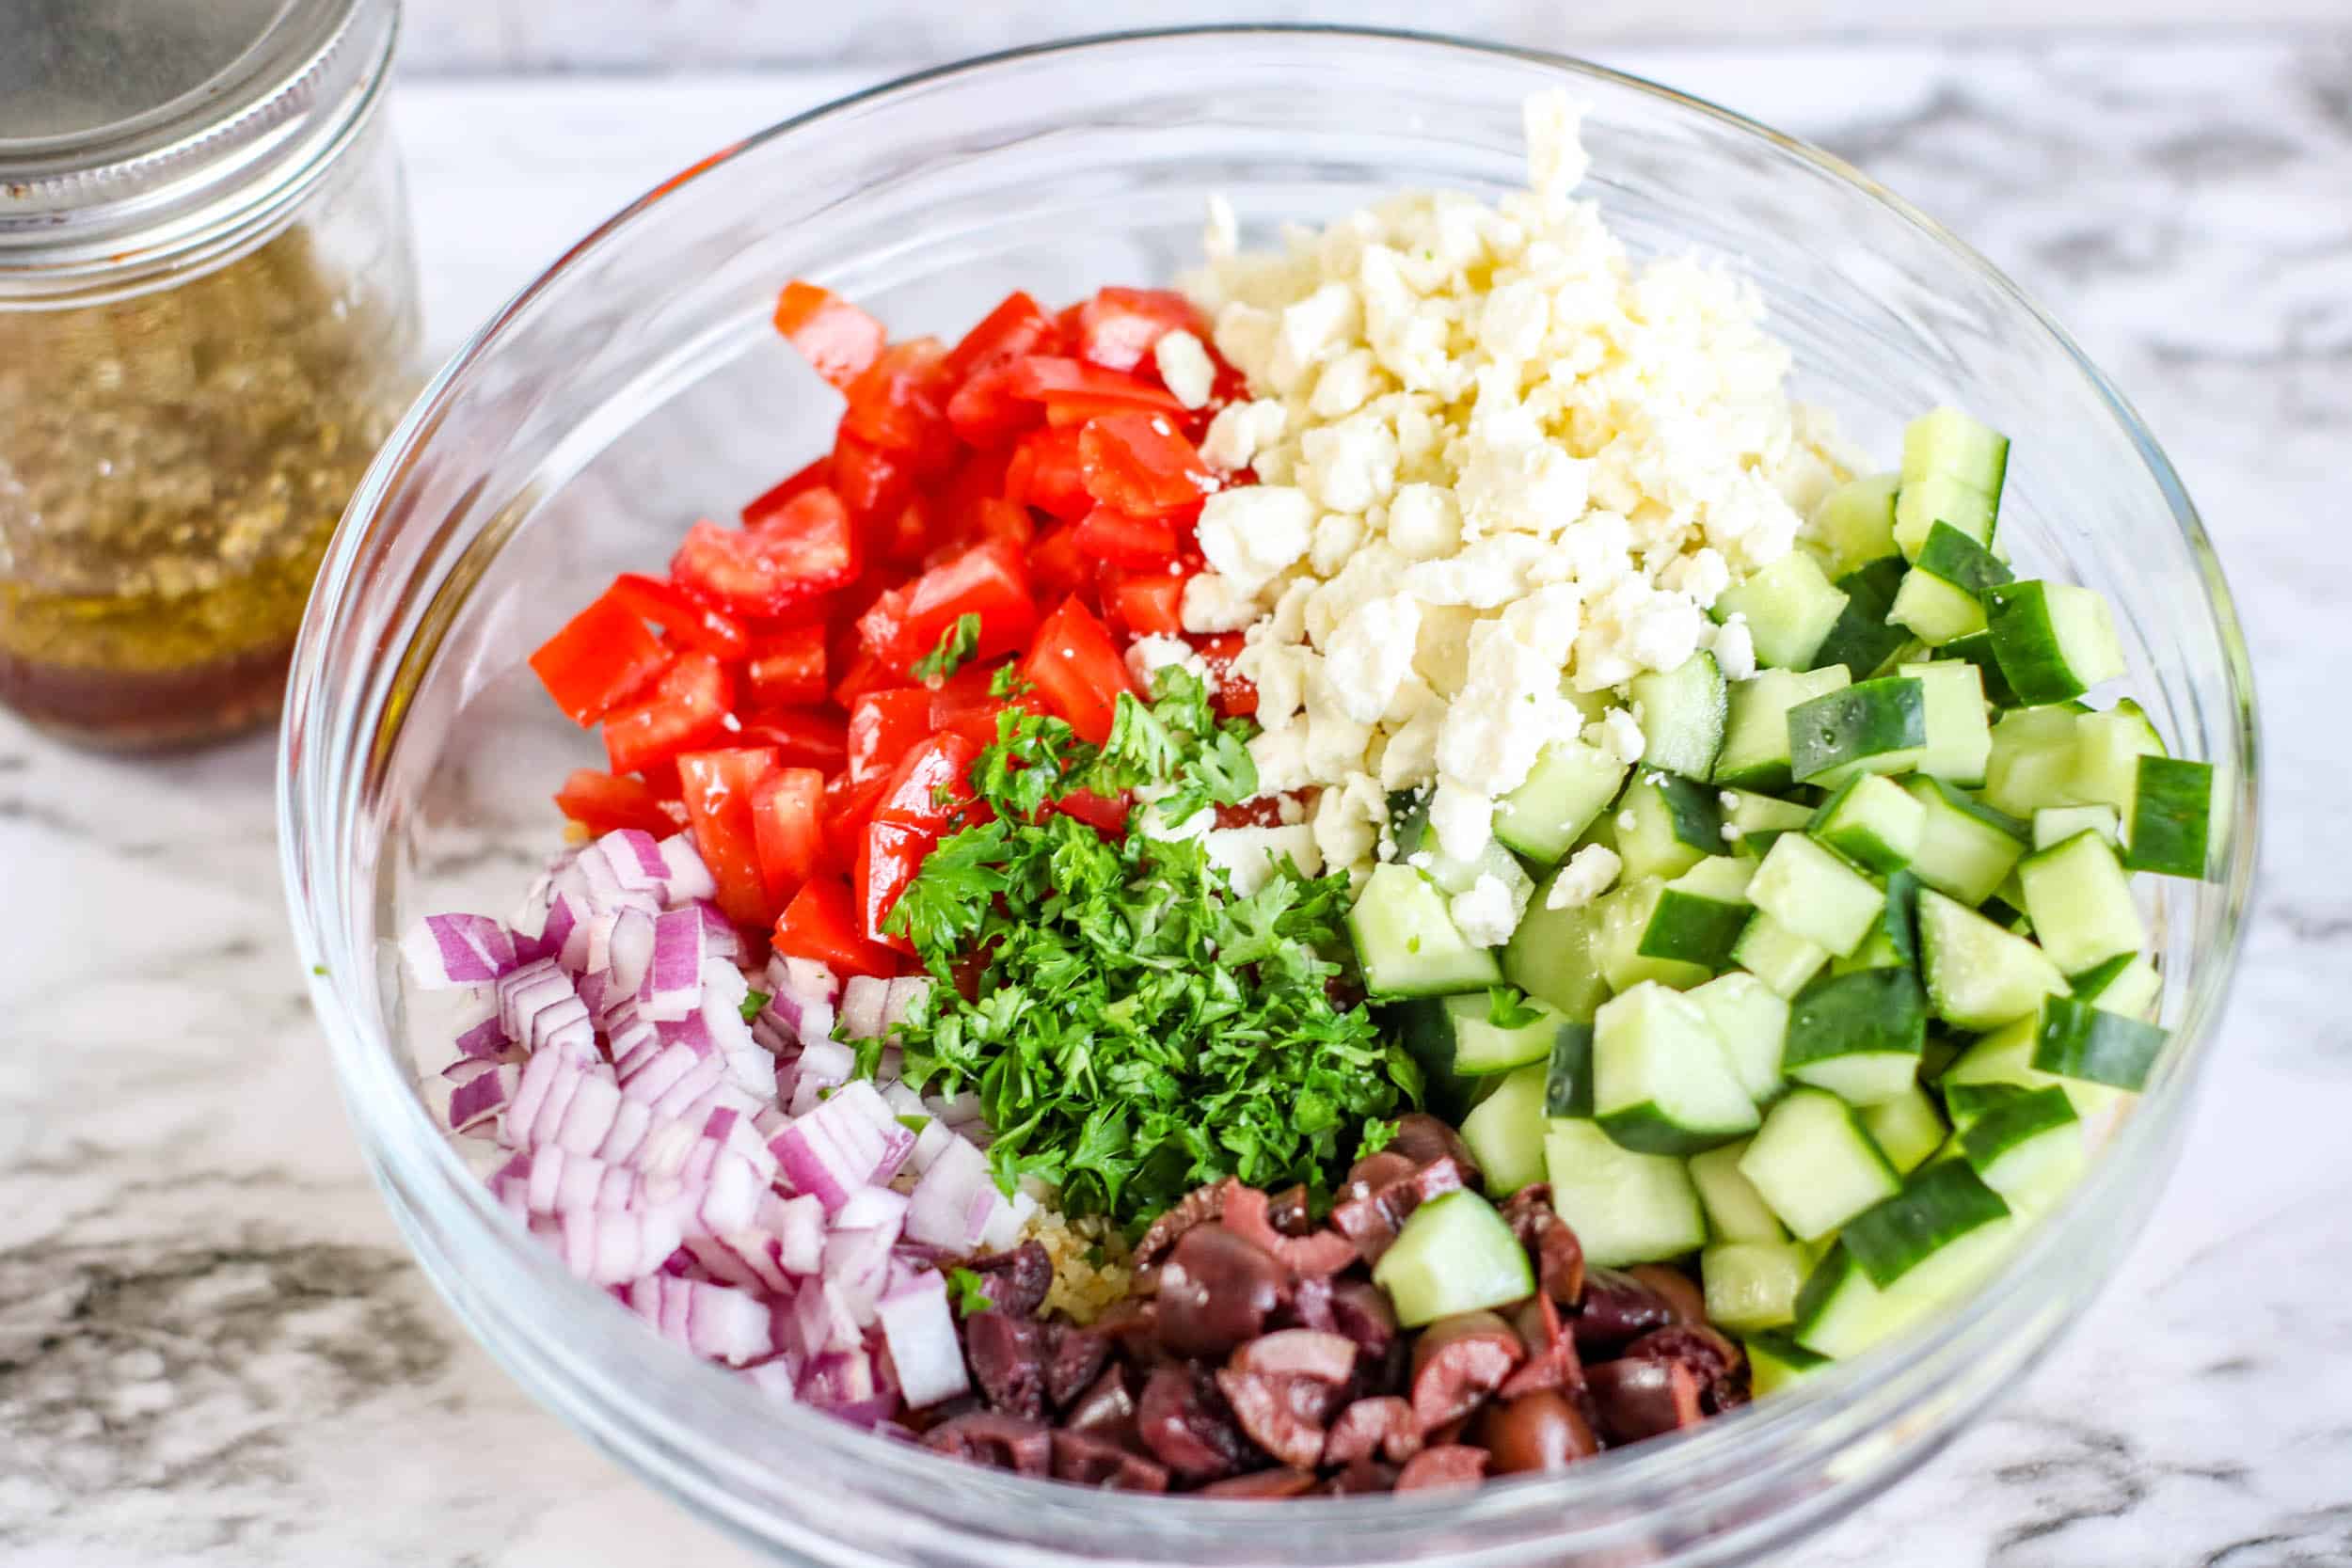 ingredients for greek salad red onion, cucumber, tomato, olives, and quinoa